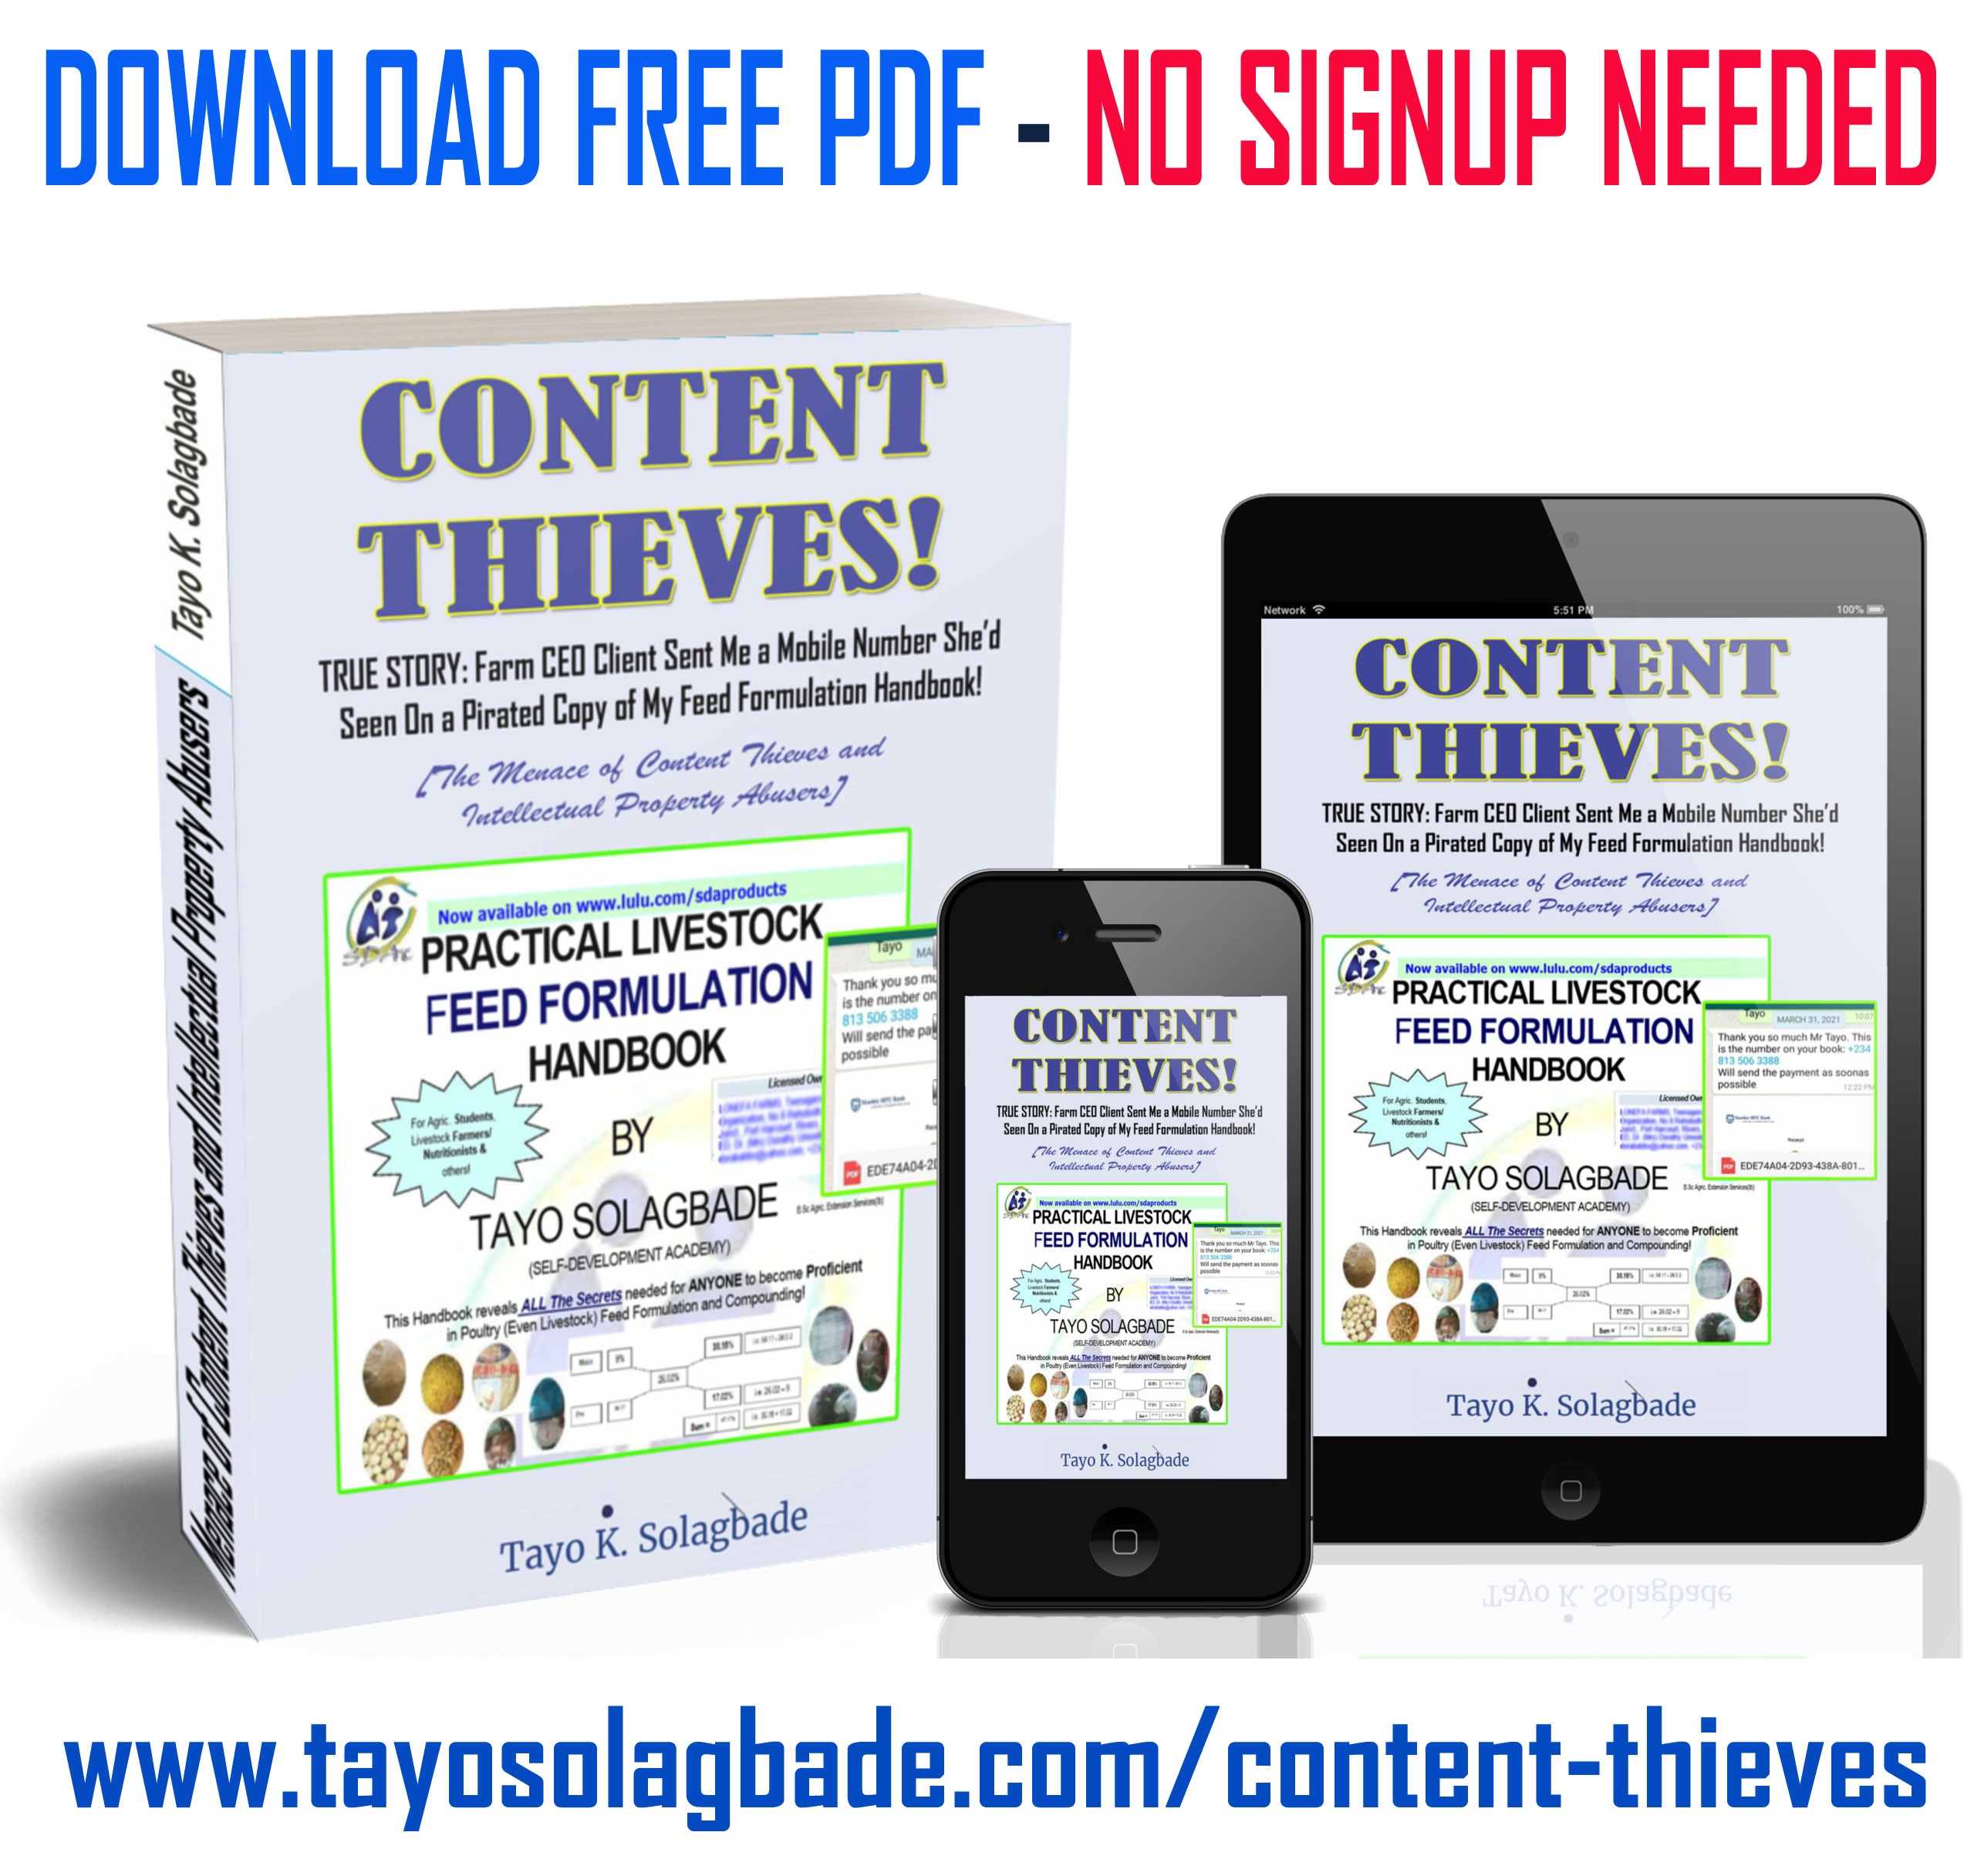 TRUE STORY: Farm CEO Client Sent Me a Mobile Number She’d Seen On a Pirated Copy of My Feed Formulation Handbook! [The Menace of Content Thieves and Intellectual Property Abusers]